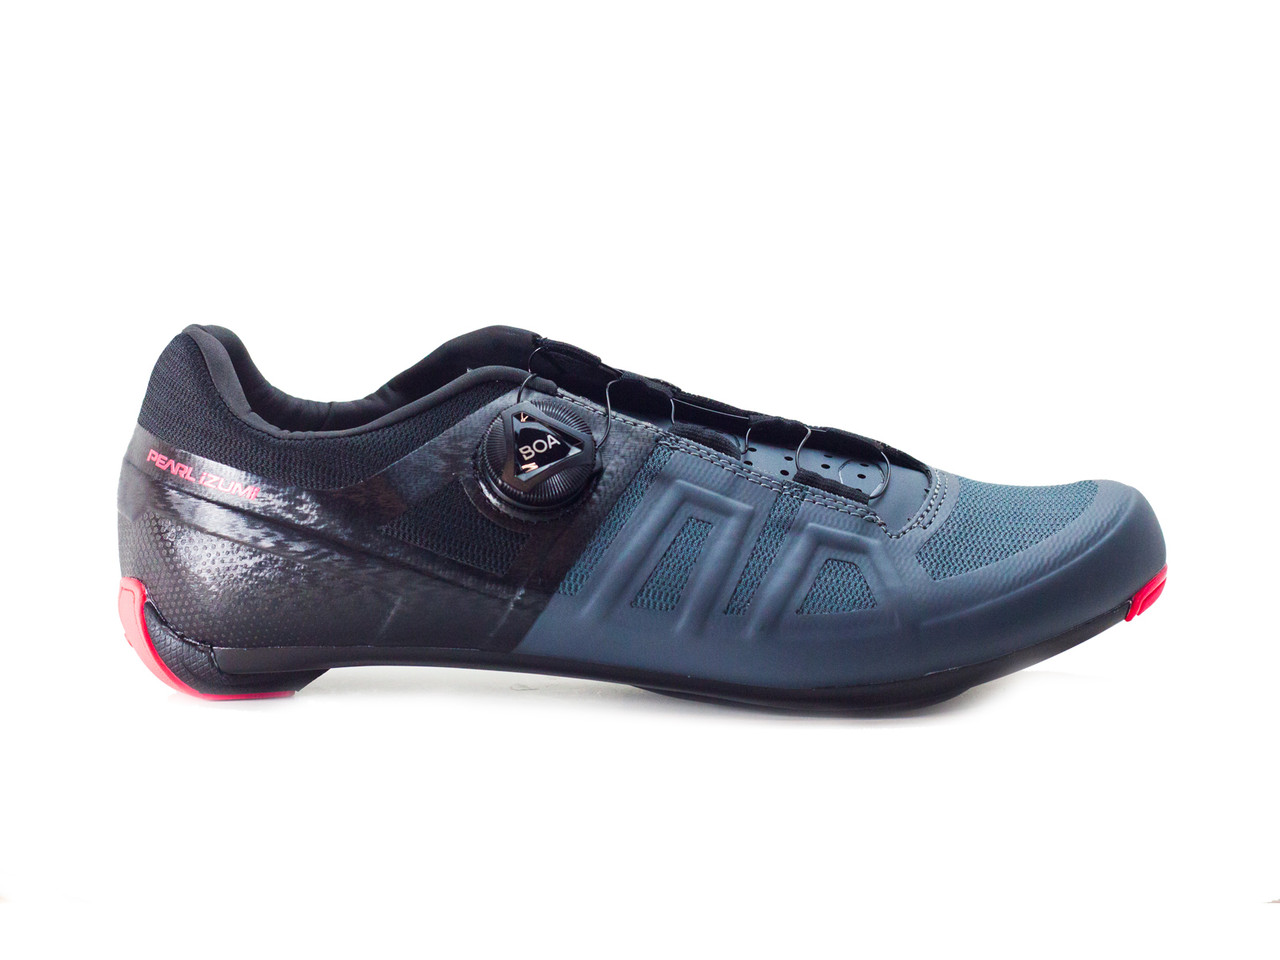 Pearl Izumi Attack Road Women's Road/Indoor Cycling Shoes -  -  Free 3 day shipping on orders over $50